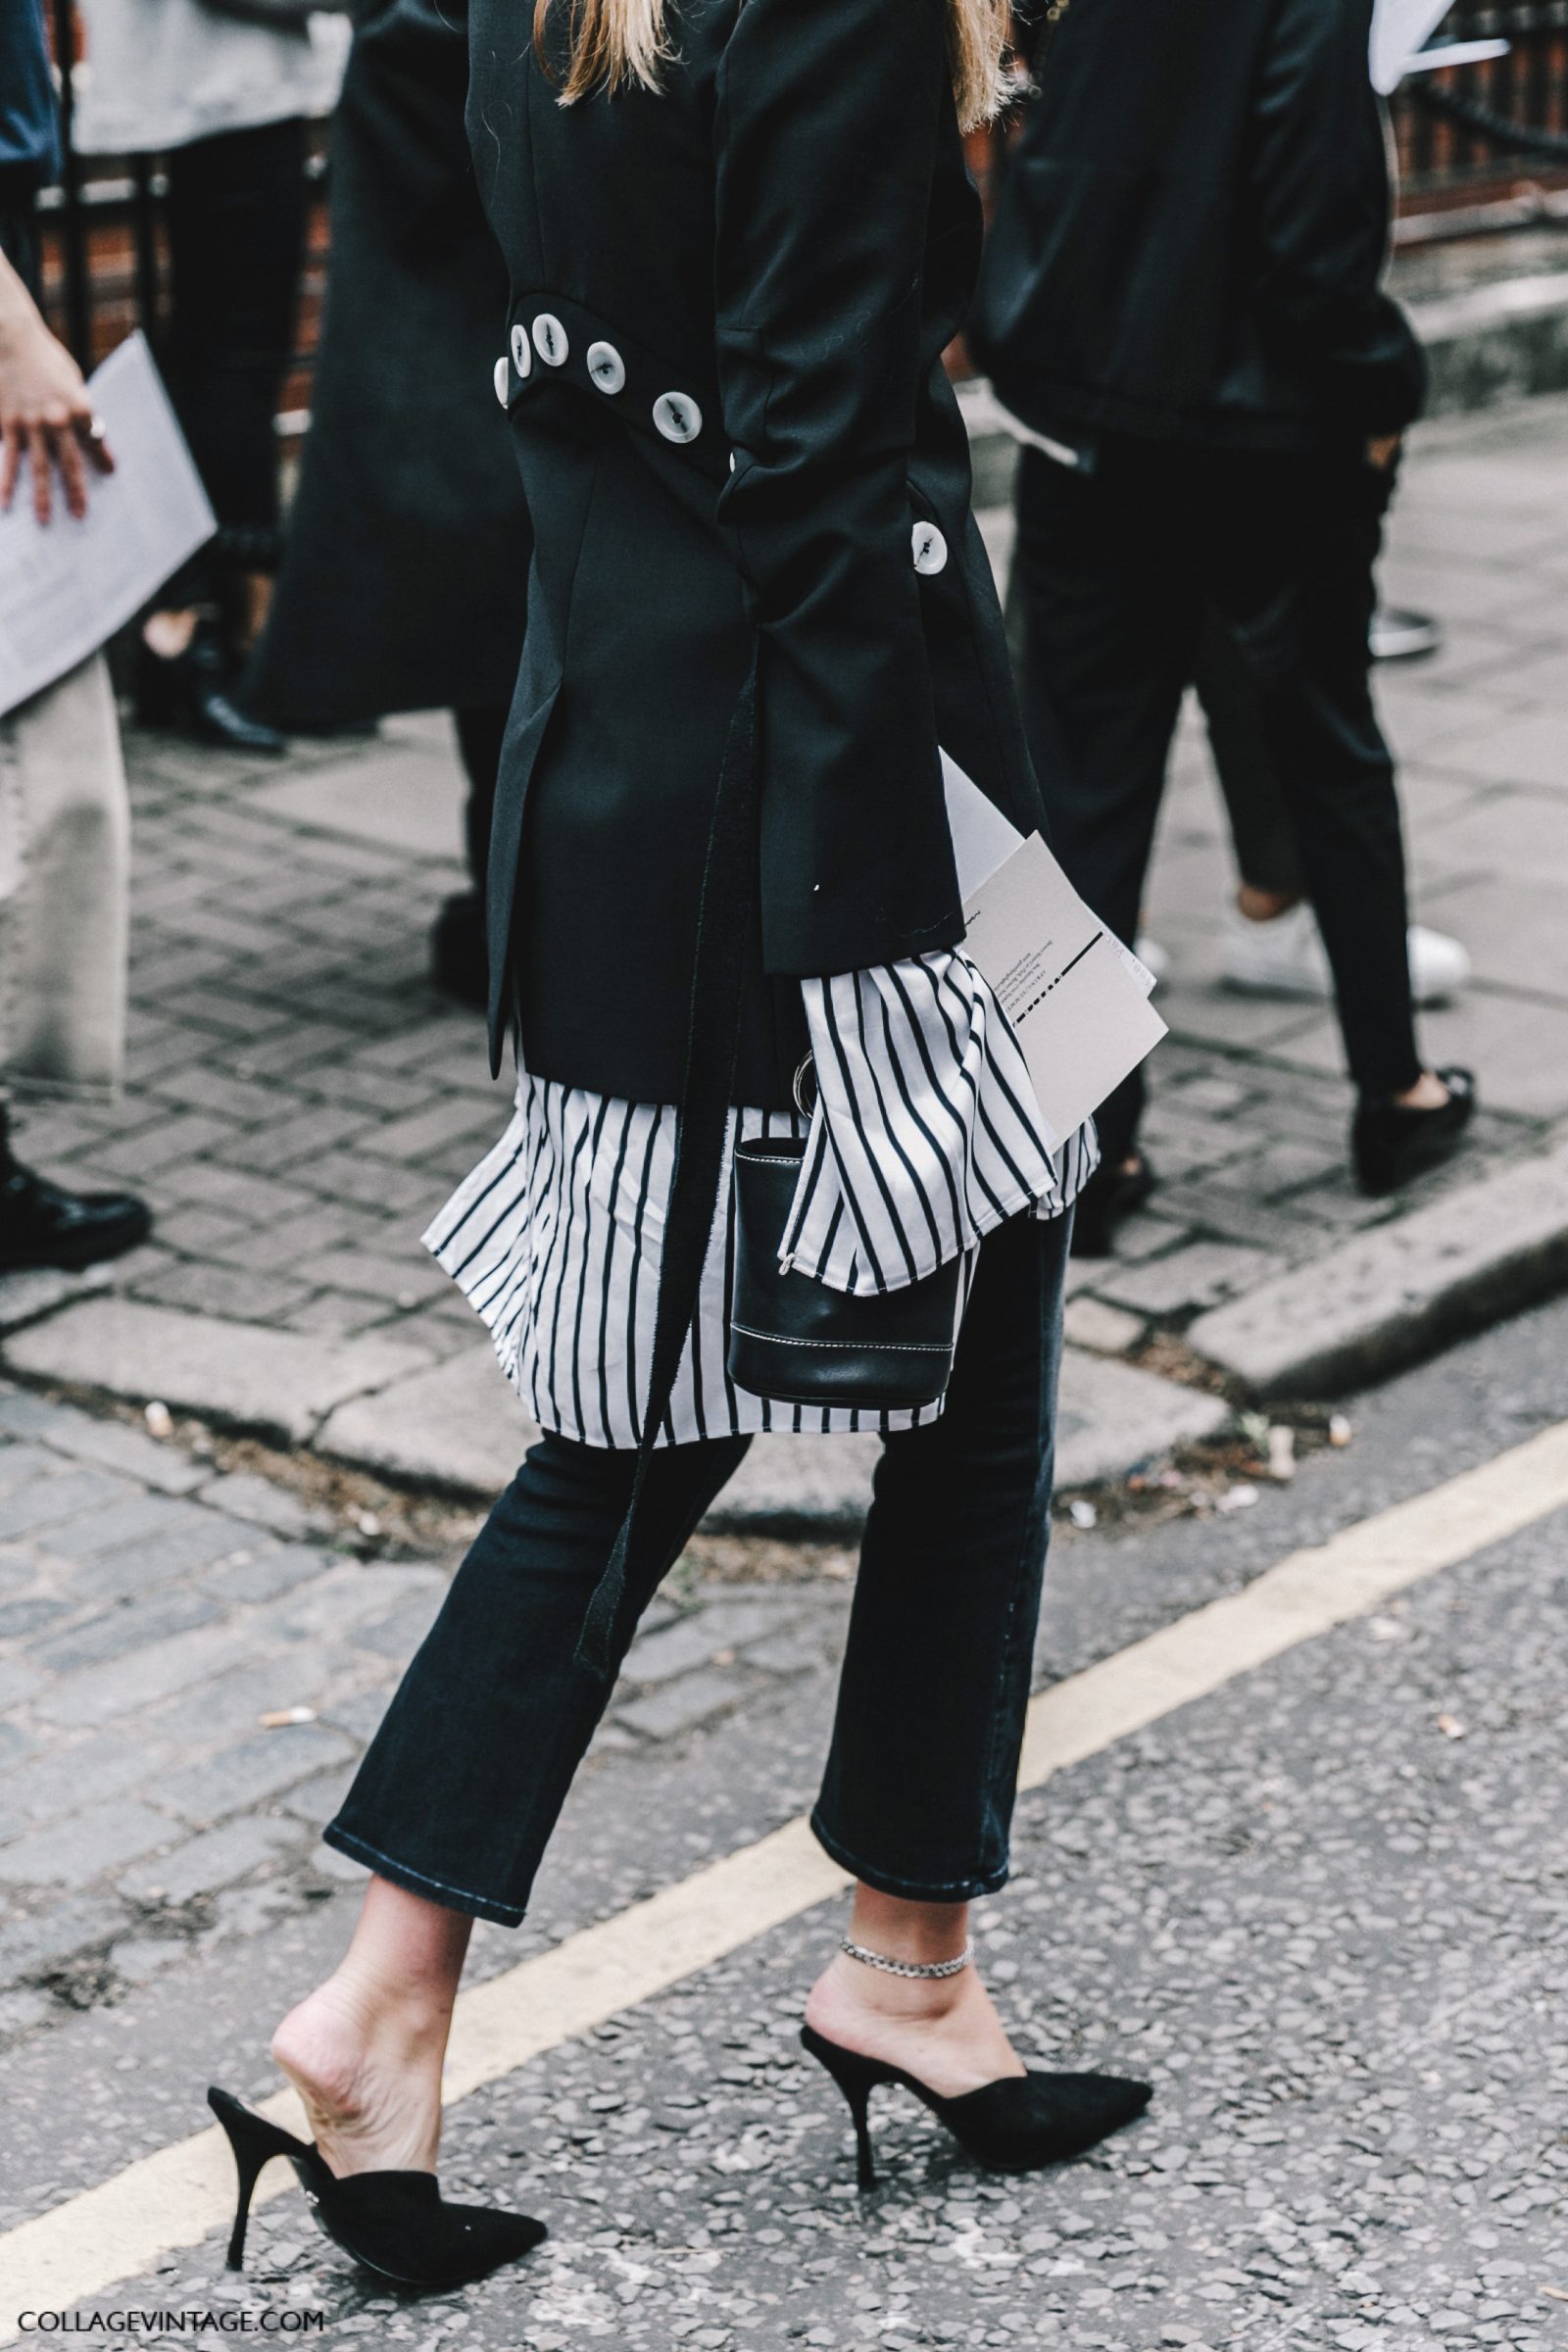 lfw-london_fashion_week_ss17-street_style-outfits-collage_vintage-vintage-jw_anderson-house_of_holland-170